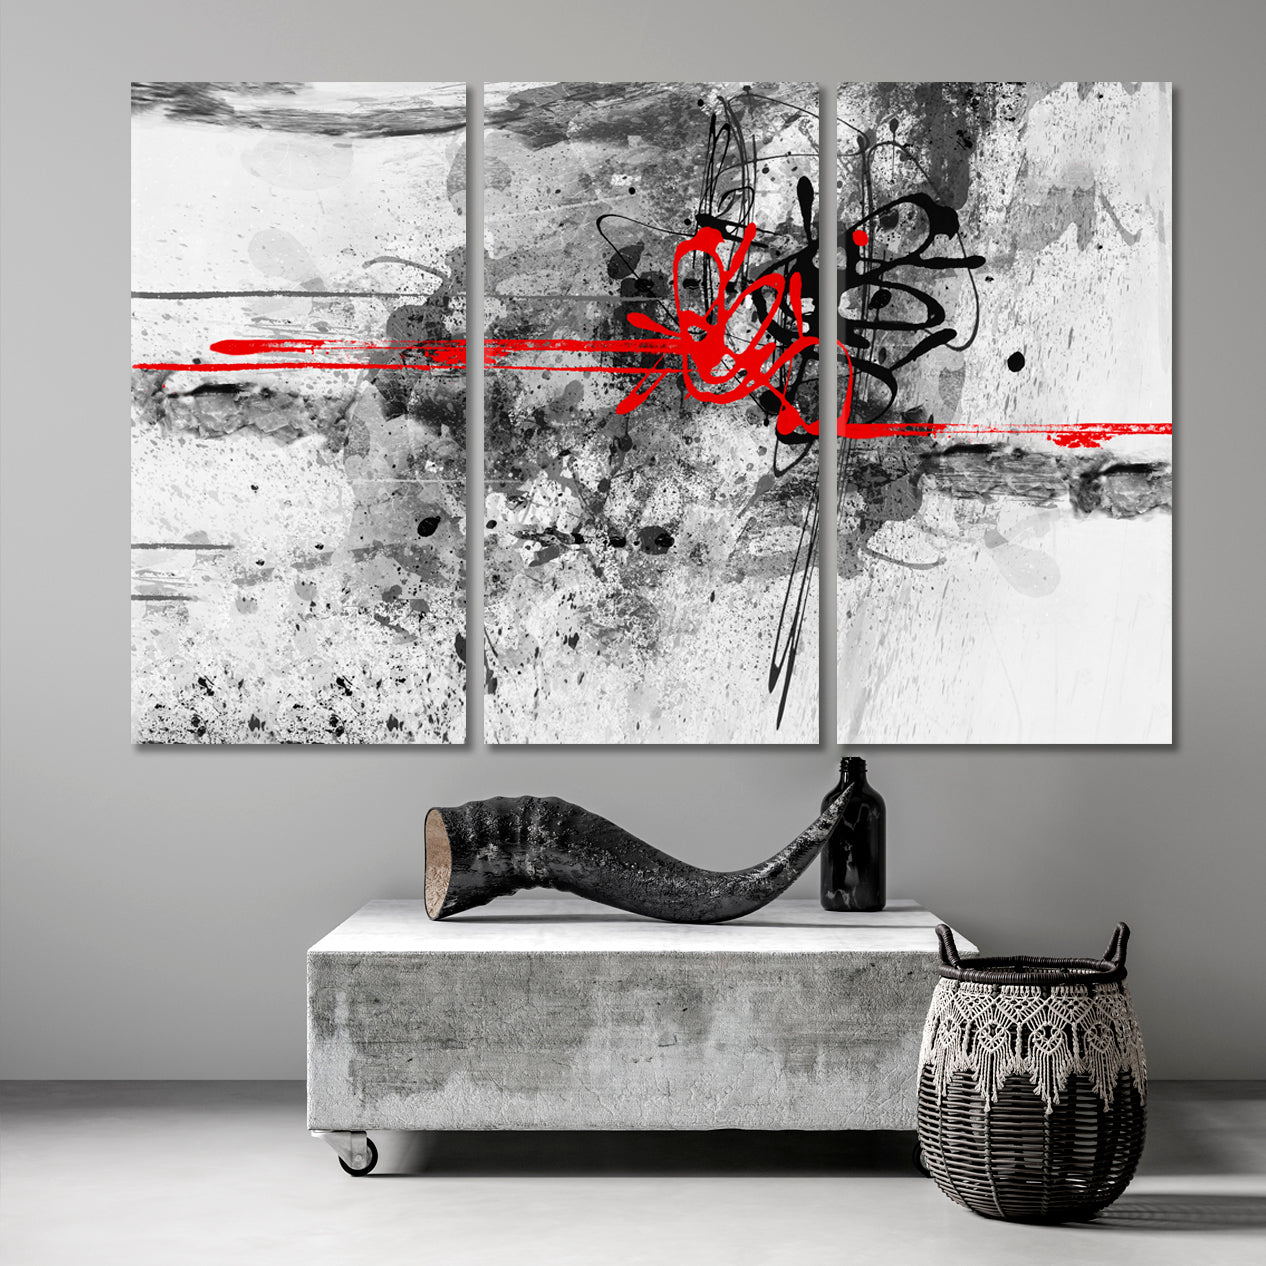 RED & BLACK ON WHITE Abstract Expressionist Drip Painting Jackson Pollock Style Canvas Print Abstract Art Print Artesty 3 panels 36" x 24" 